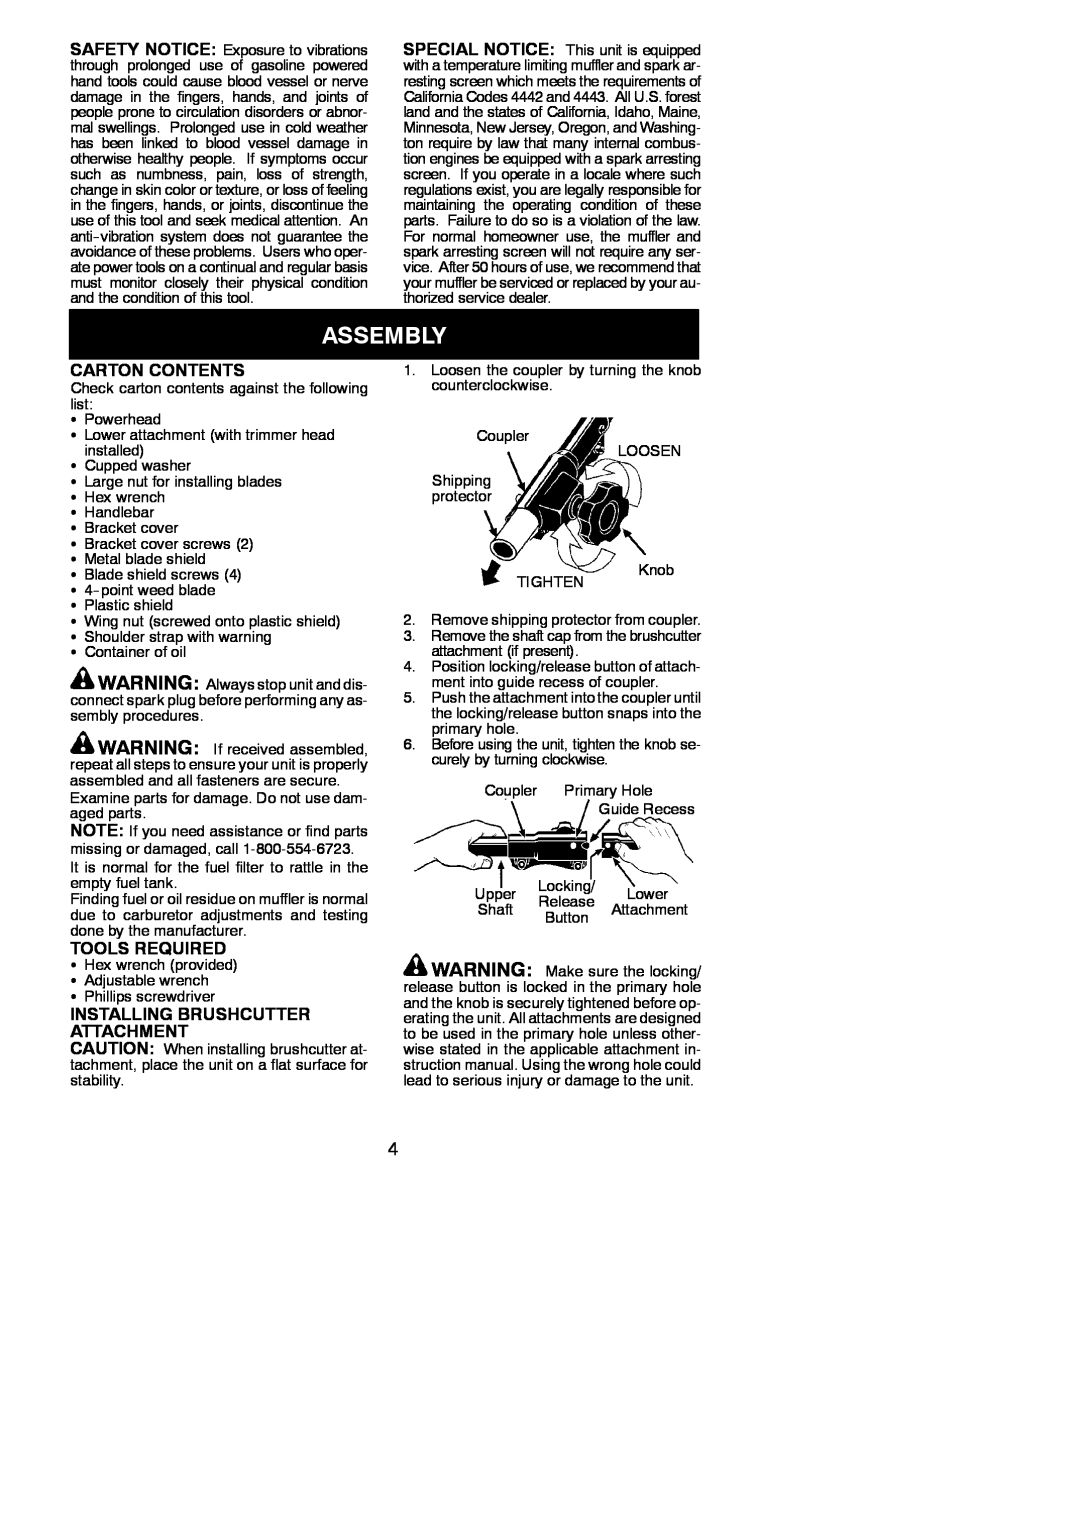 Poulan PP336 instruction manual Assembly, Carton Contents, Tools Required, Installing Brushcutter Attachment 